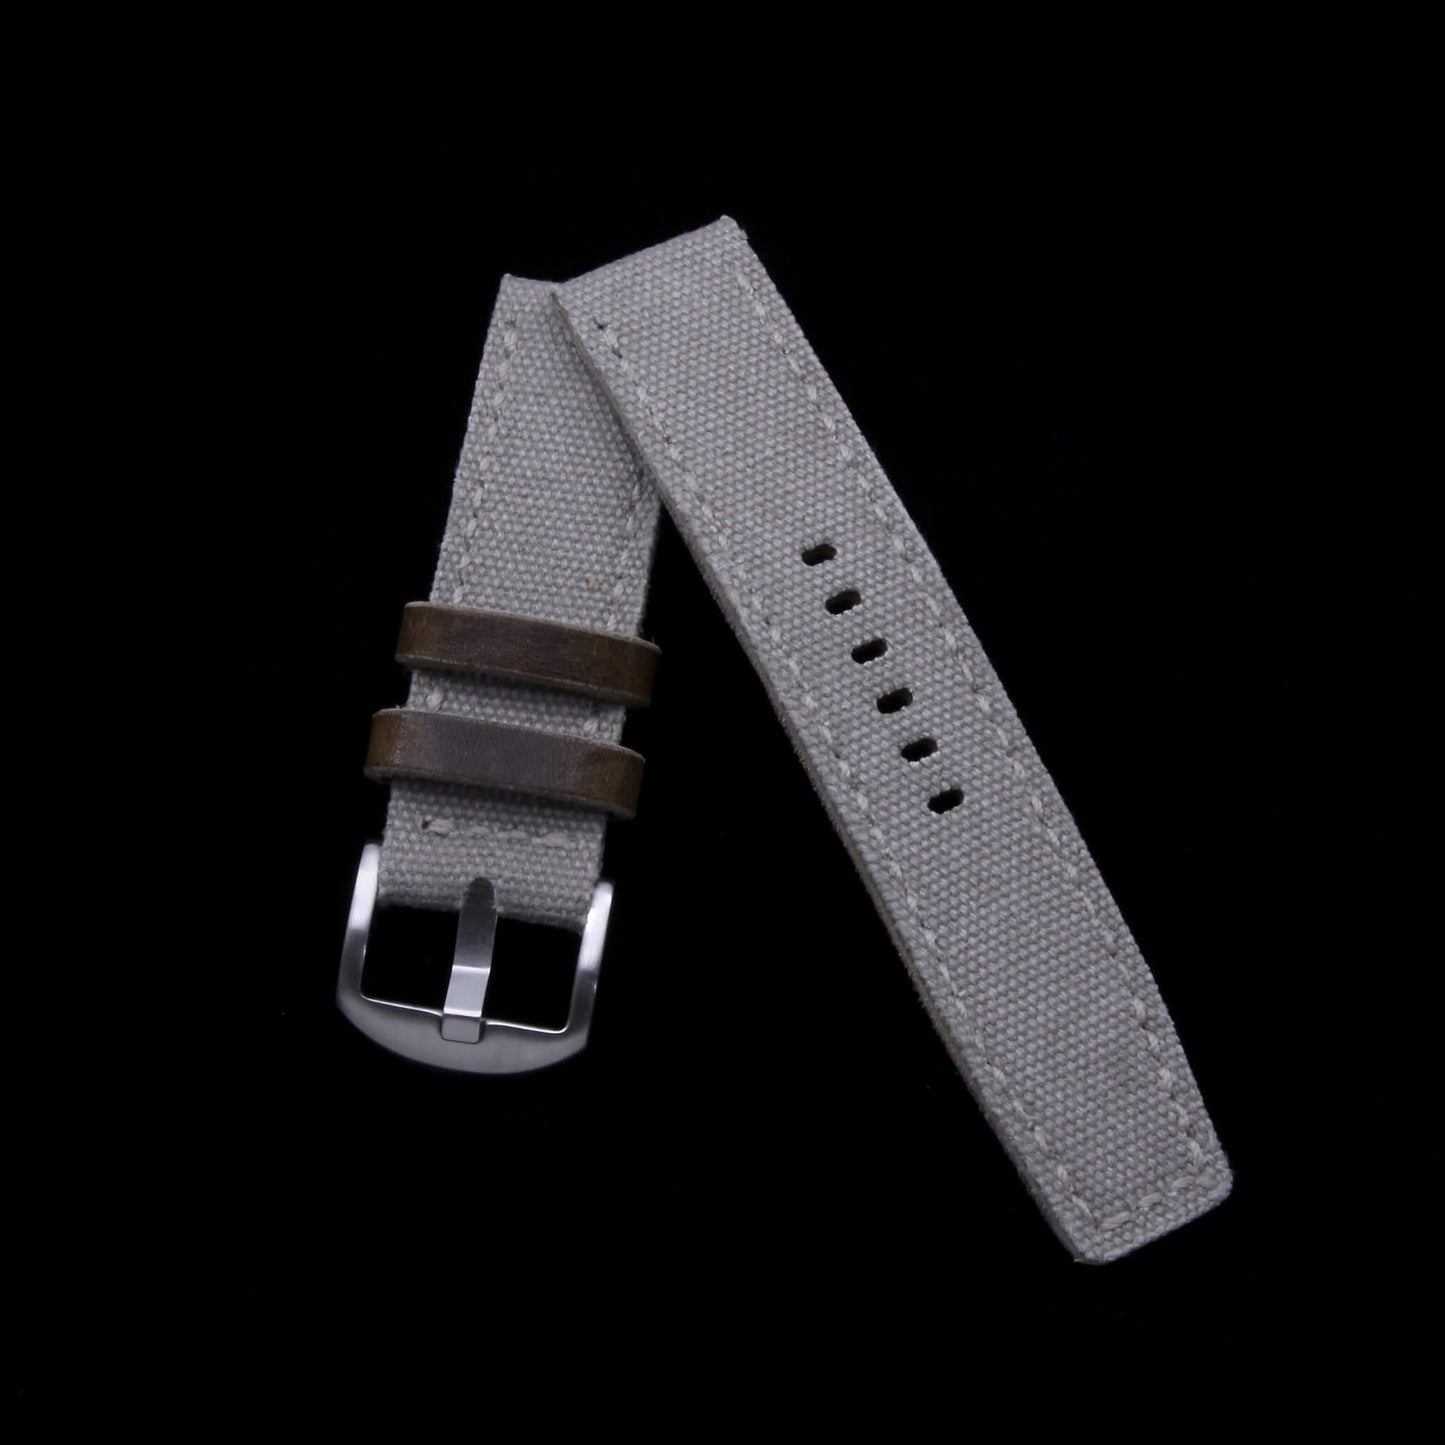 2-Piece Full Stitch Leather Watch Strap, made with Grey Canvas and Italian veg-tanned leather lining, handcrafted by Cozy Handmade